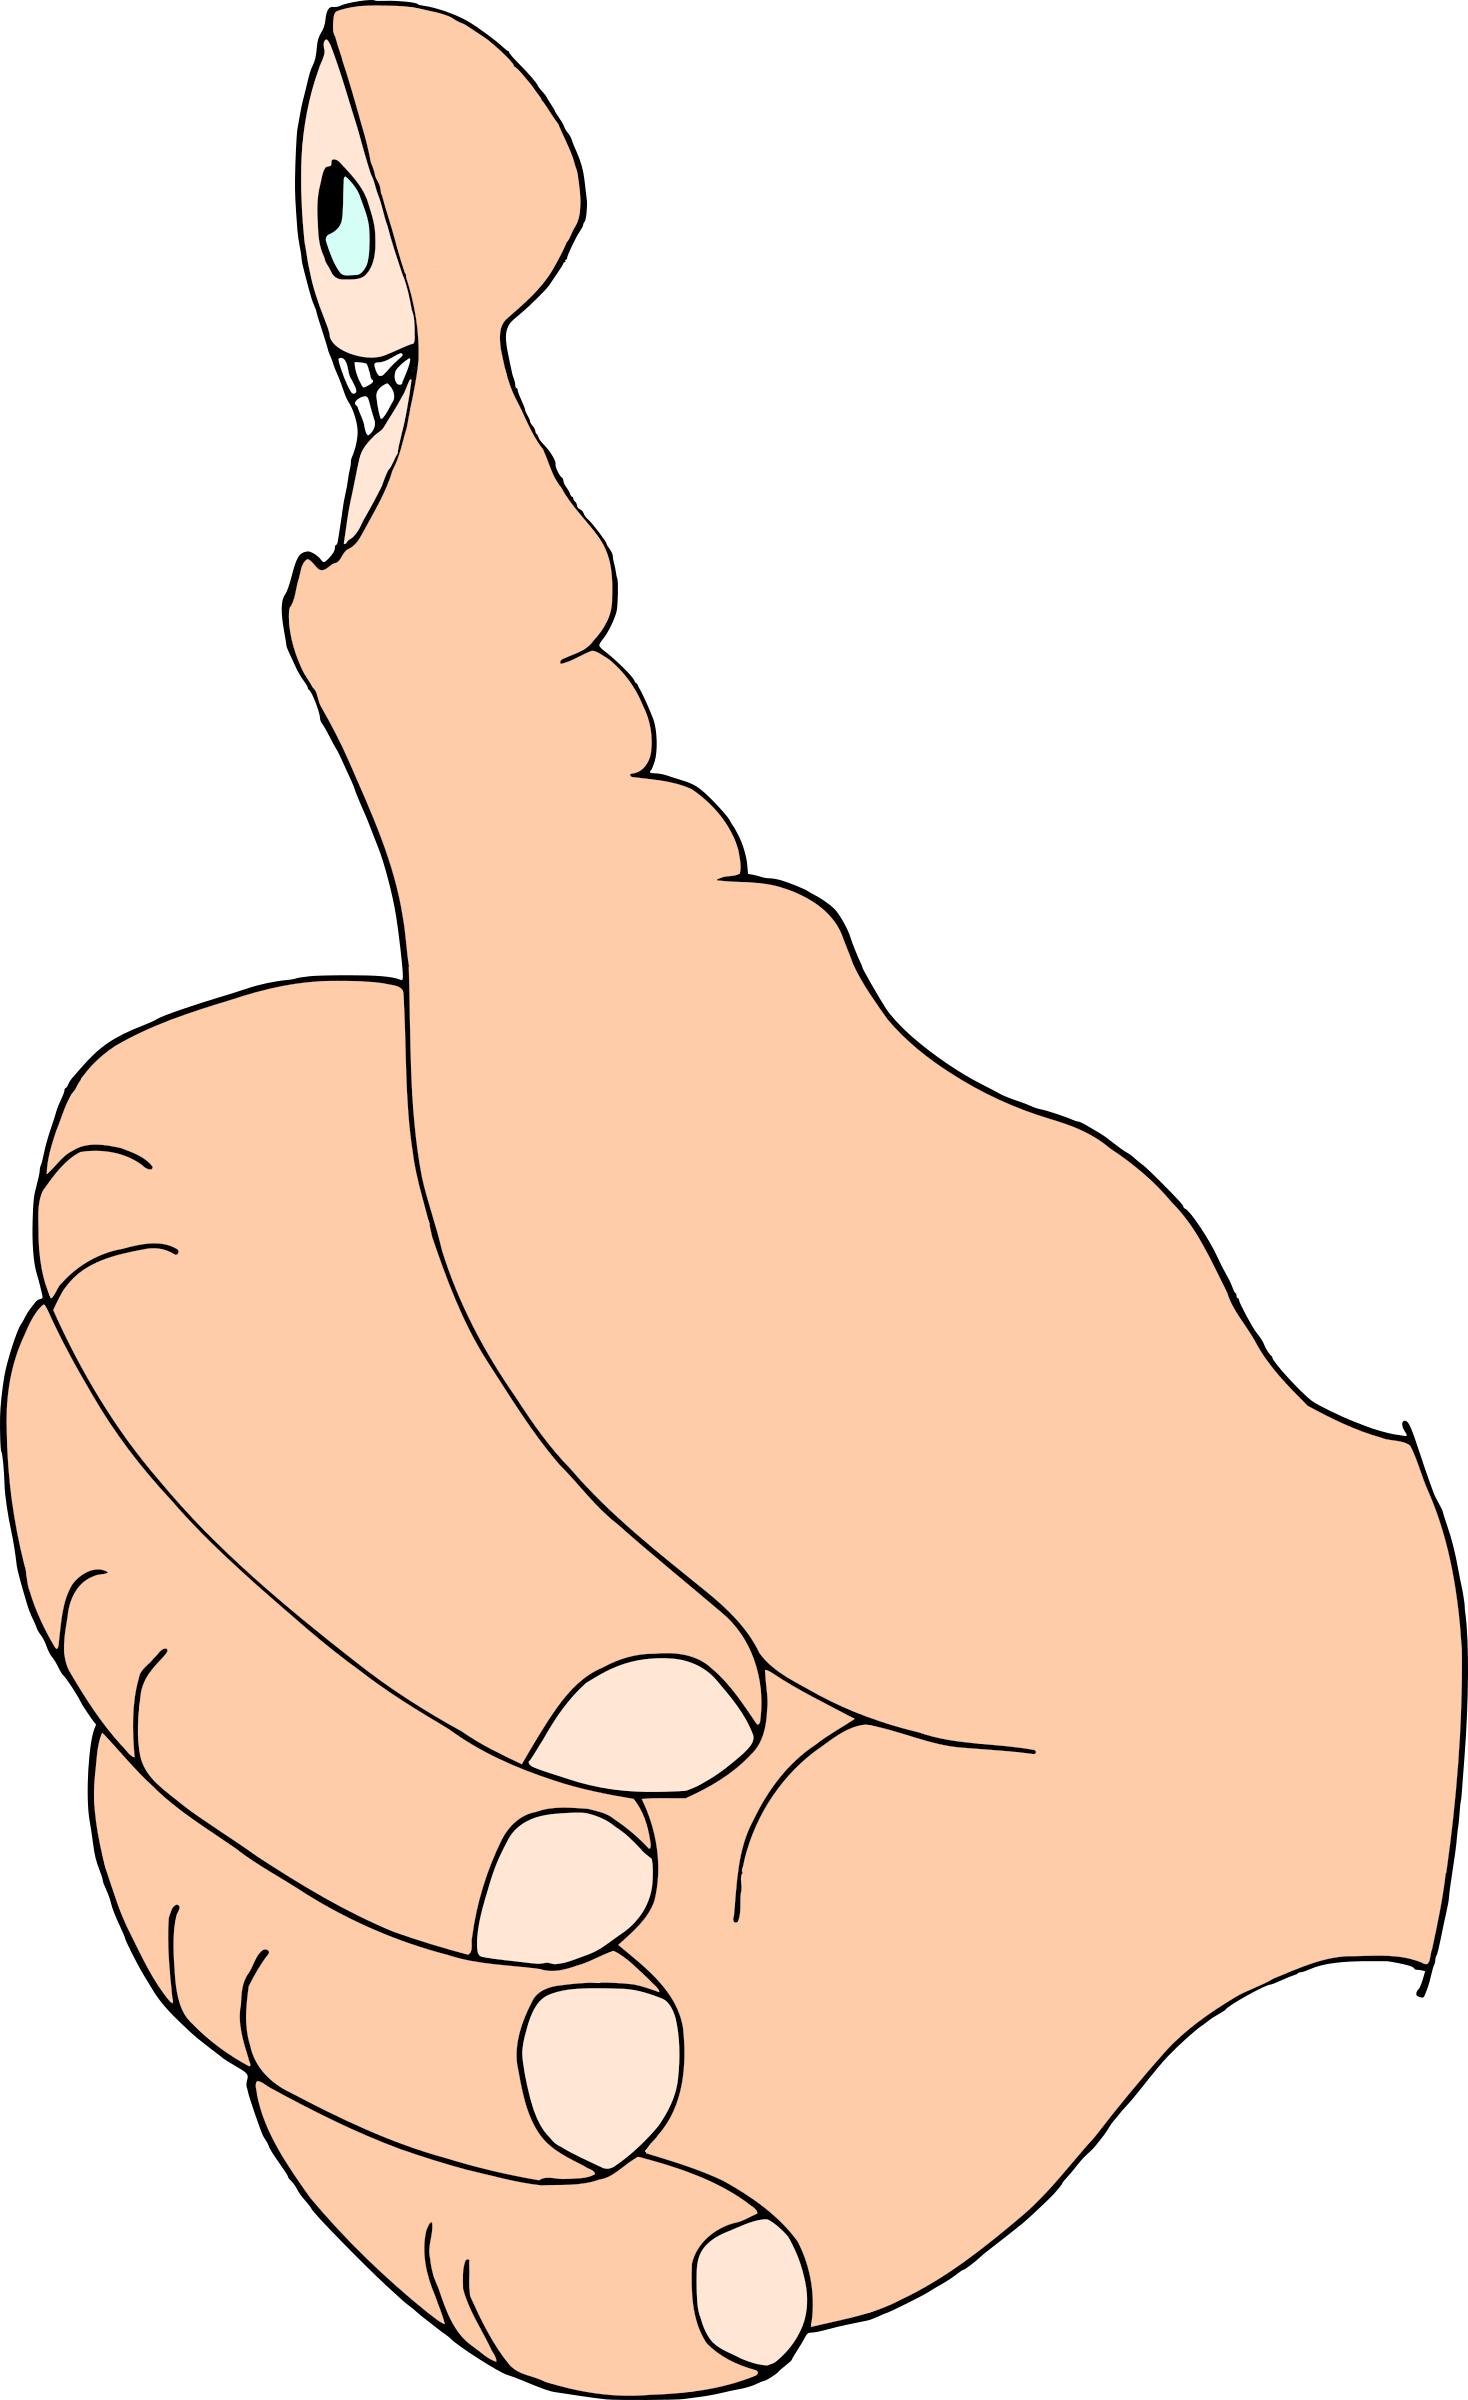 Thumbs Up png